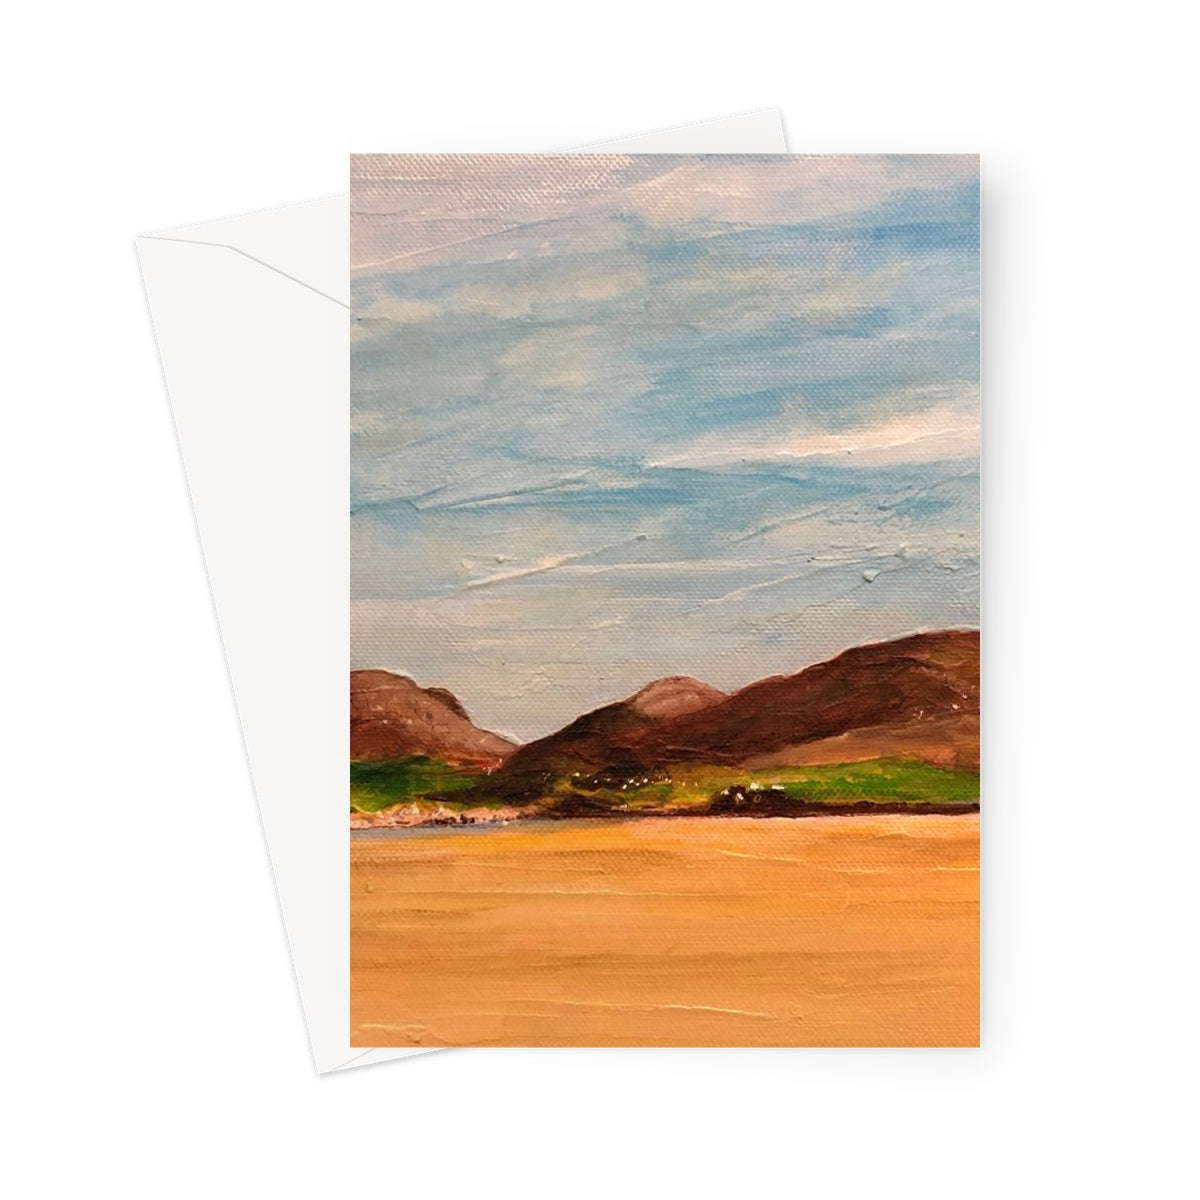 Uig Sands Lewis Art Gifts Greeting Card-Greetings Cards-Hebridean Islands Art Gallery-5"x7"-10 Cards-Paintings, Prints, Homeware, Art Gifts From Scotland By Scottish Artist Kevin Hunter